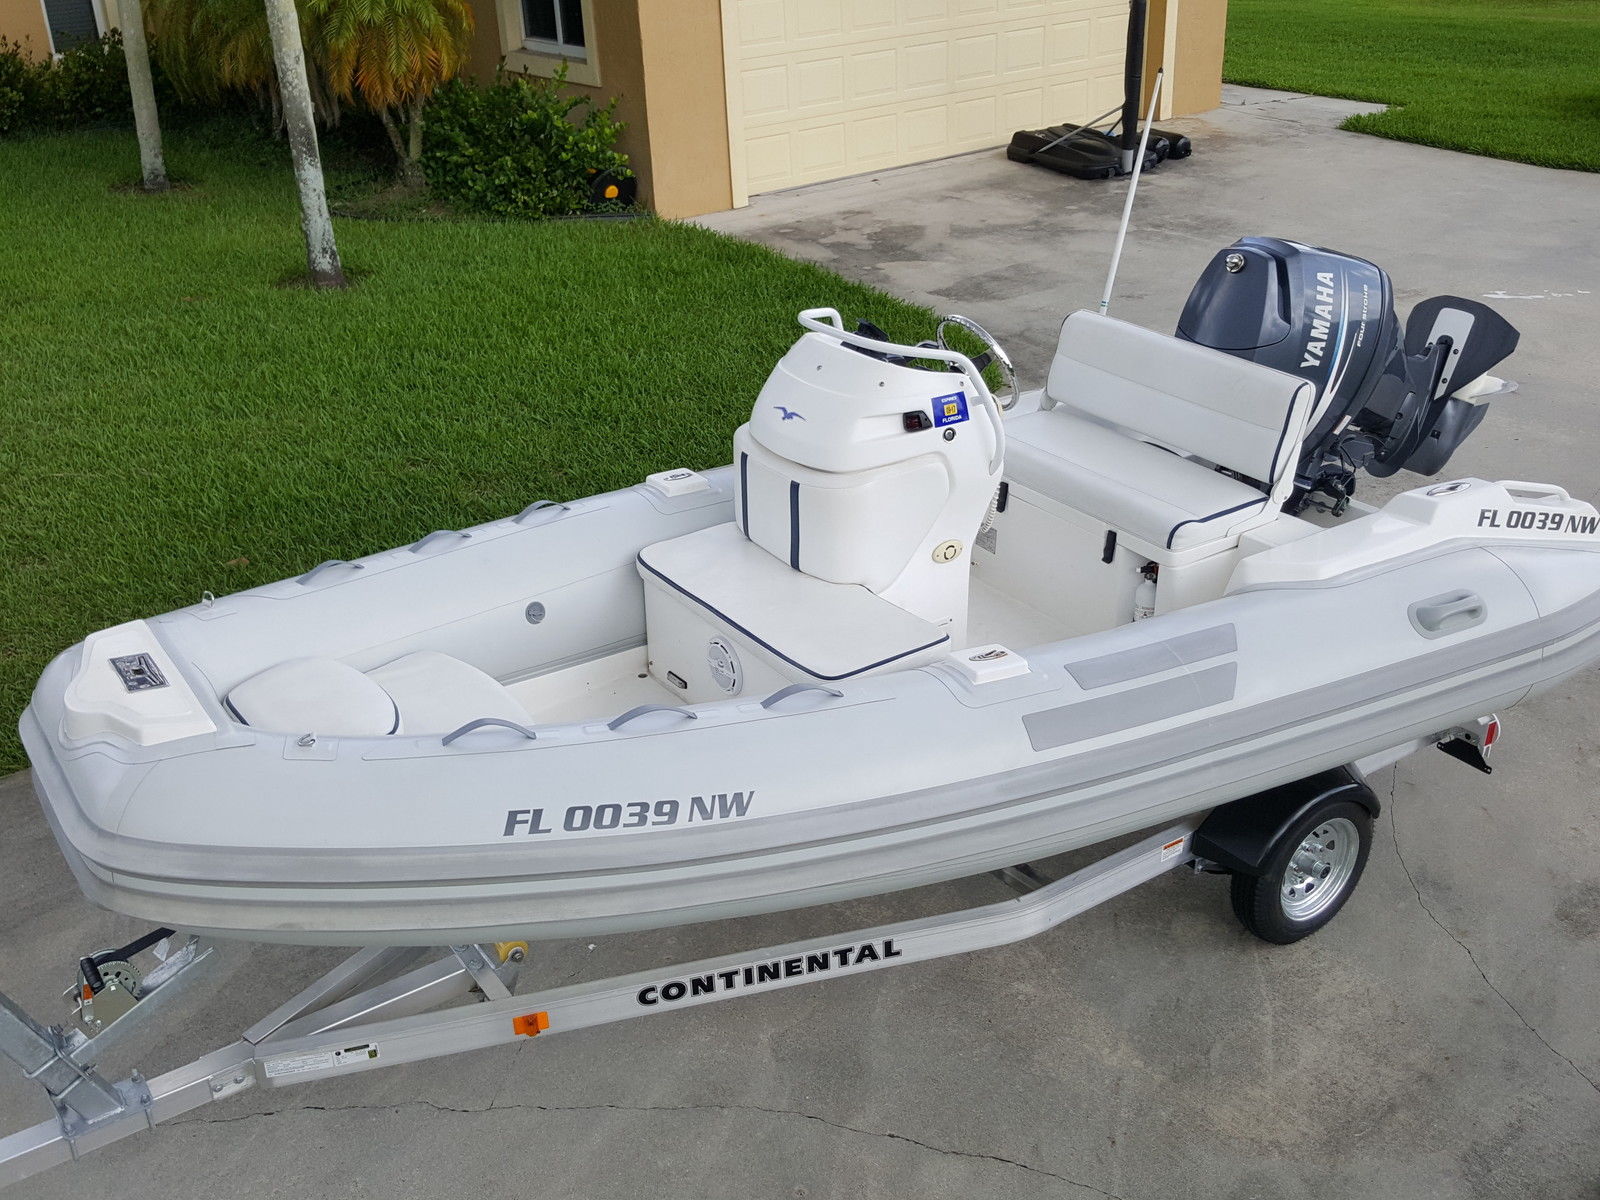 Nautica Inflatables 15 FT Wide Body RIB 2009 For Sale.